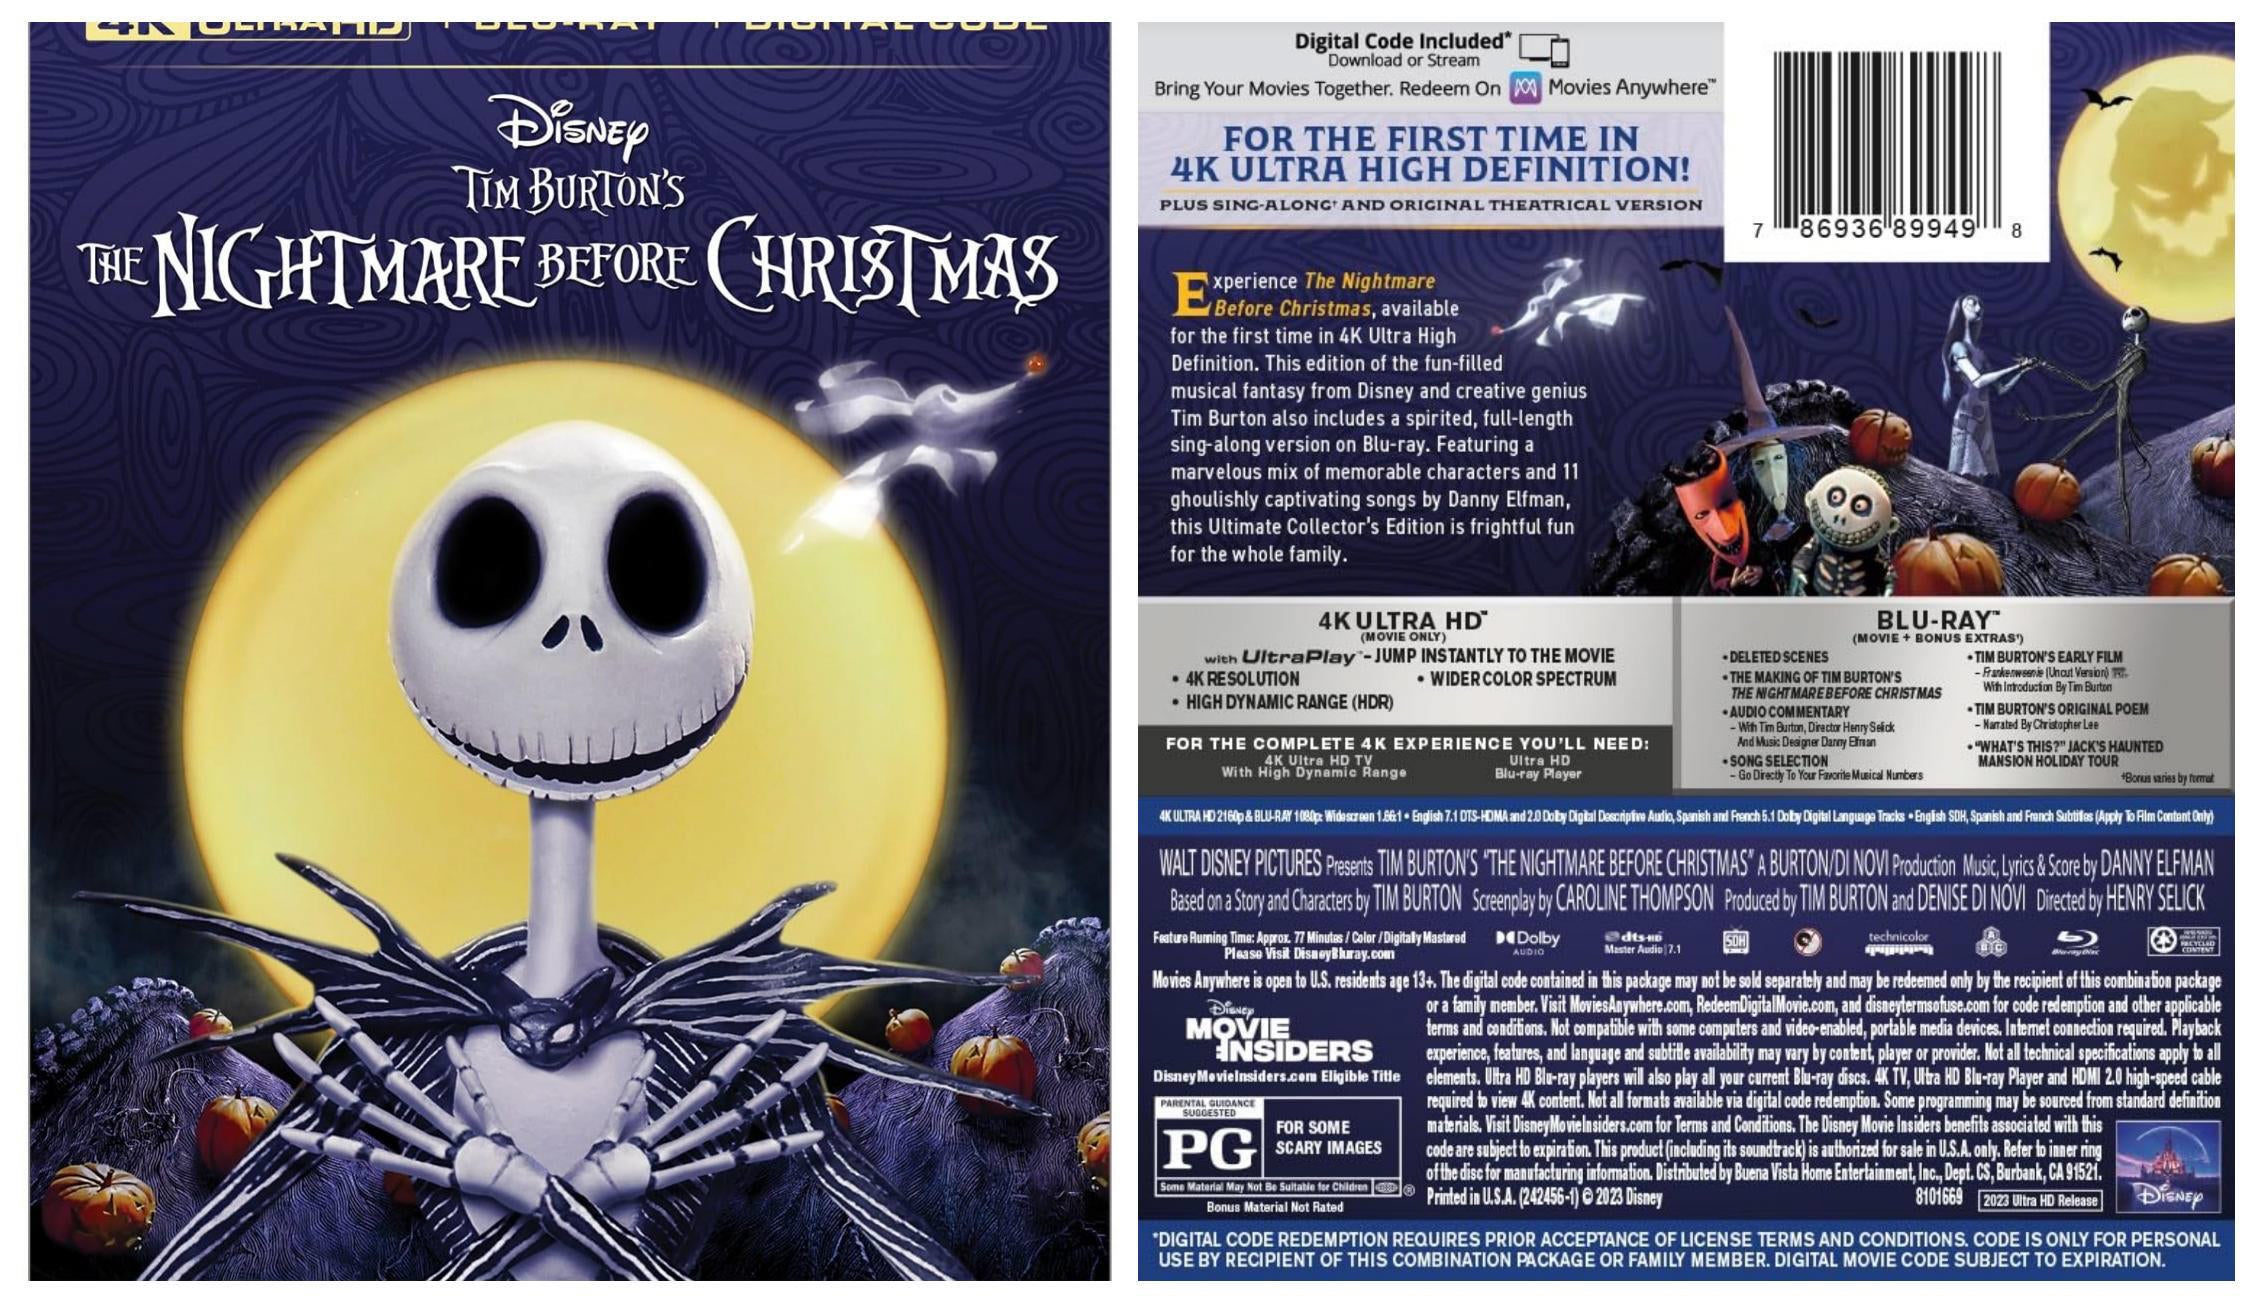 The Nightmare Before Christmas 4K Bluray PreOrders Are Up On Amazon